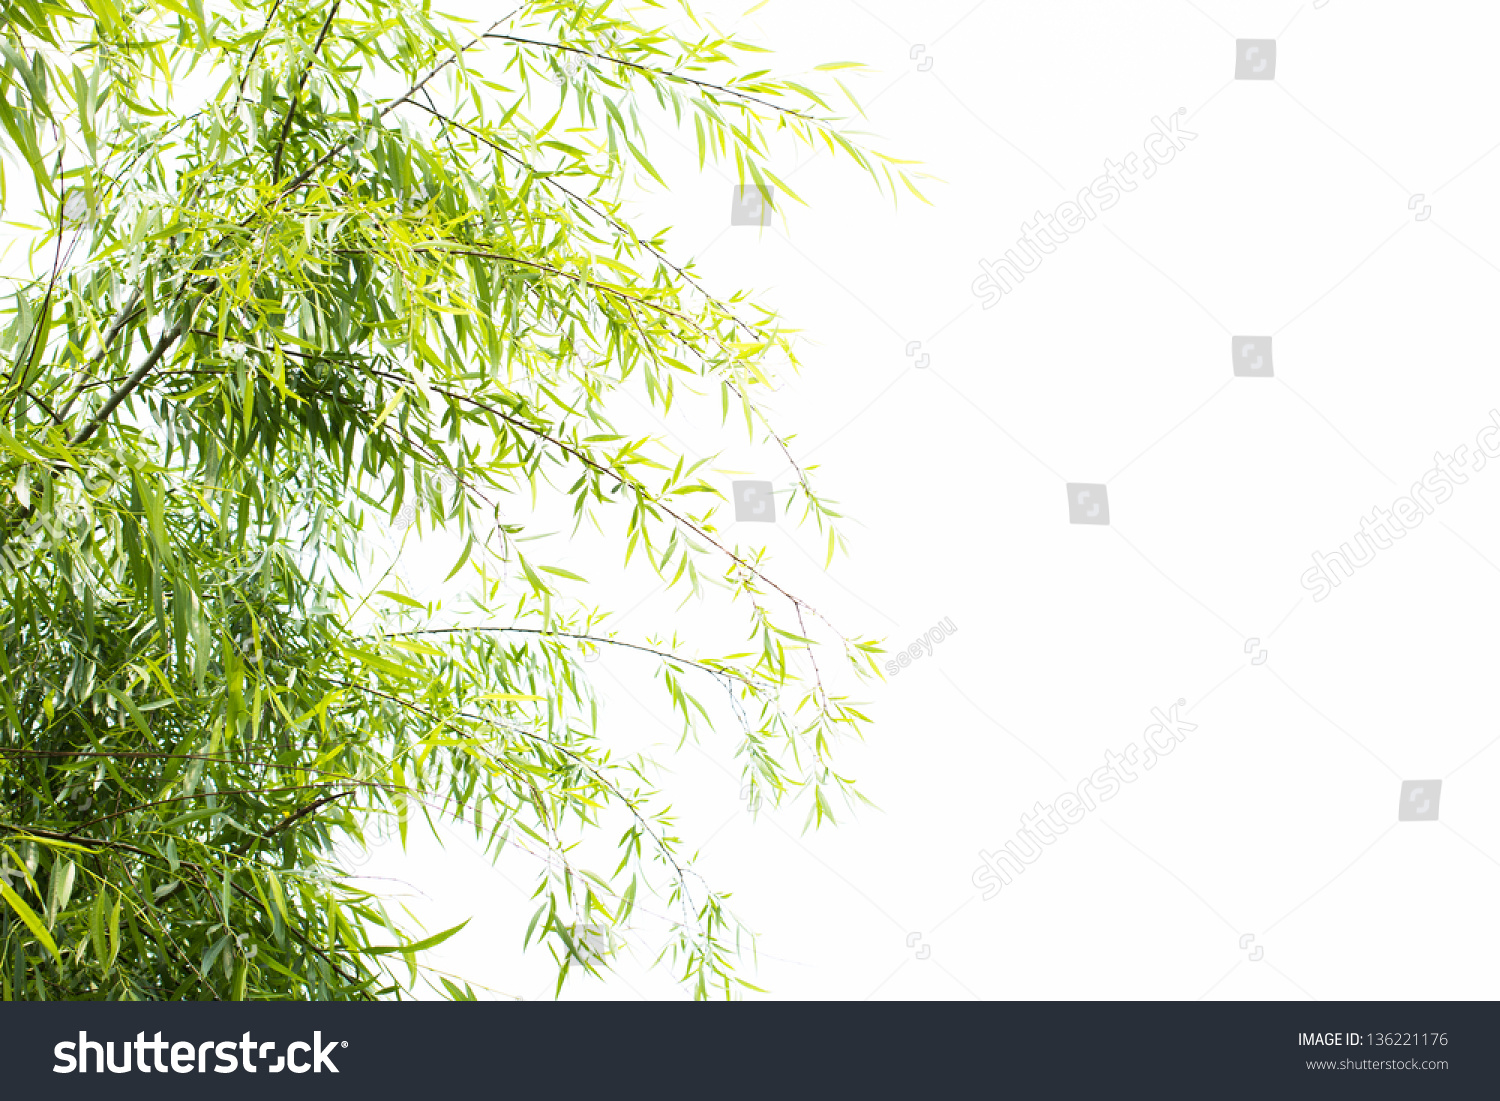 Willow Tree Isolated Stock Photo 136221176 : Shutterstock